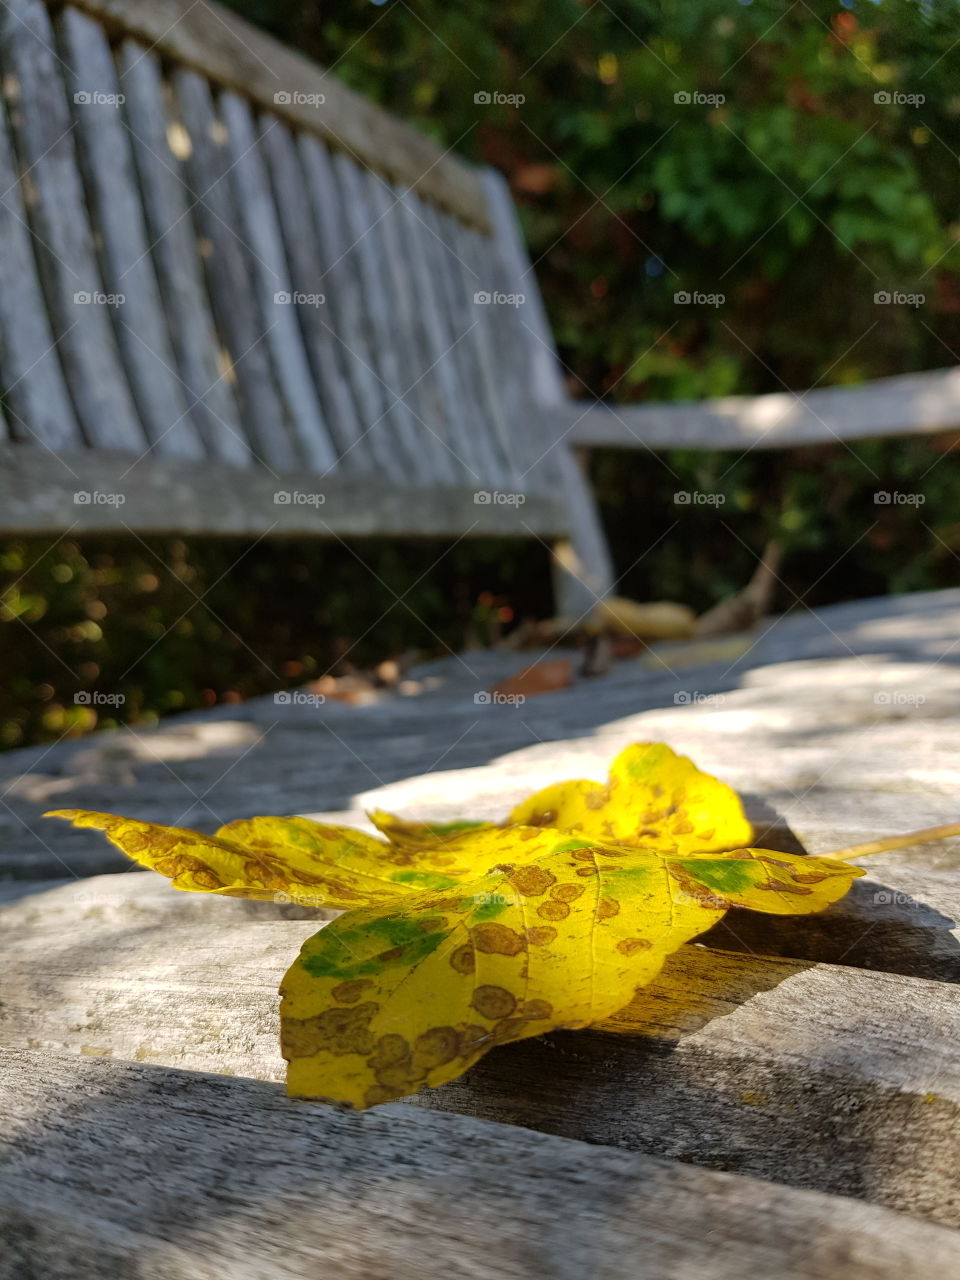 A Yellow Leaf laying on a Bench in Park